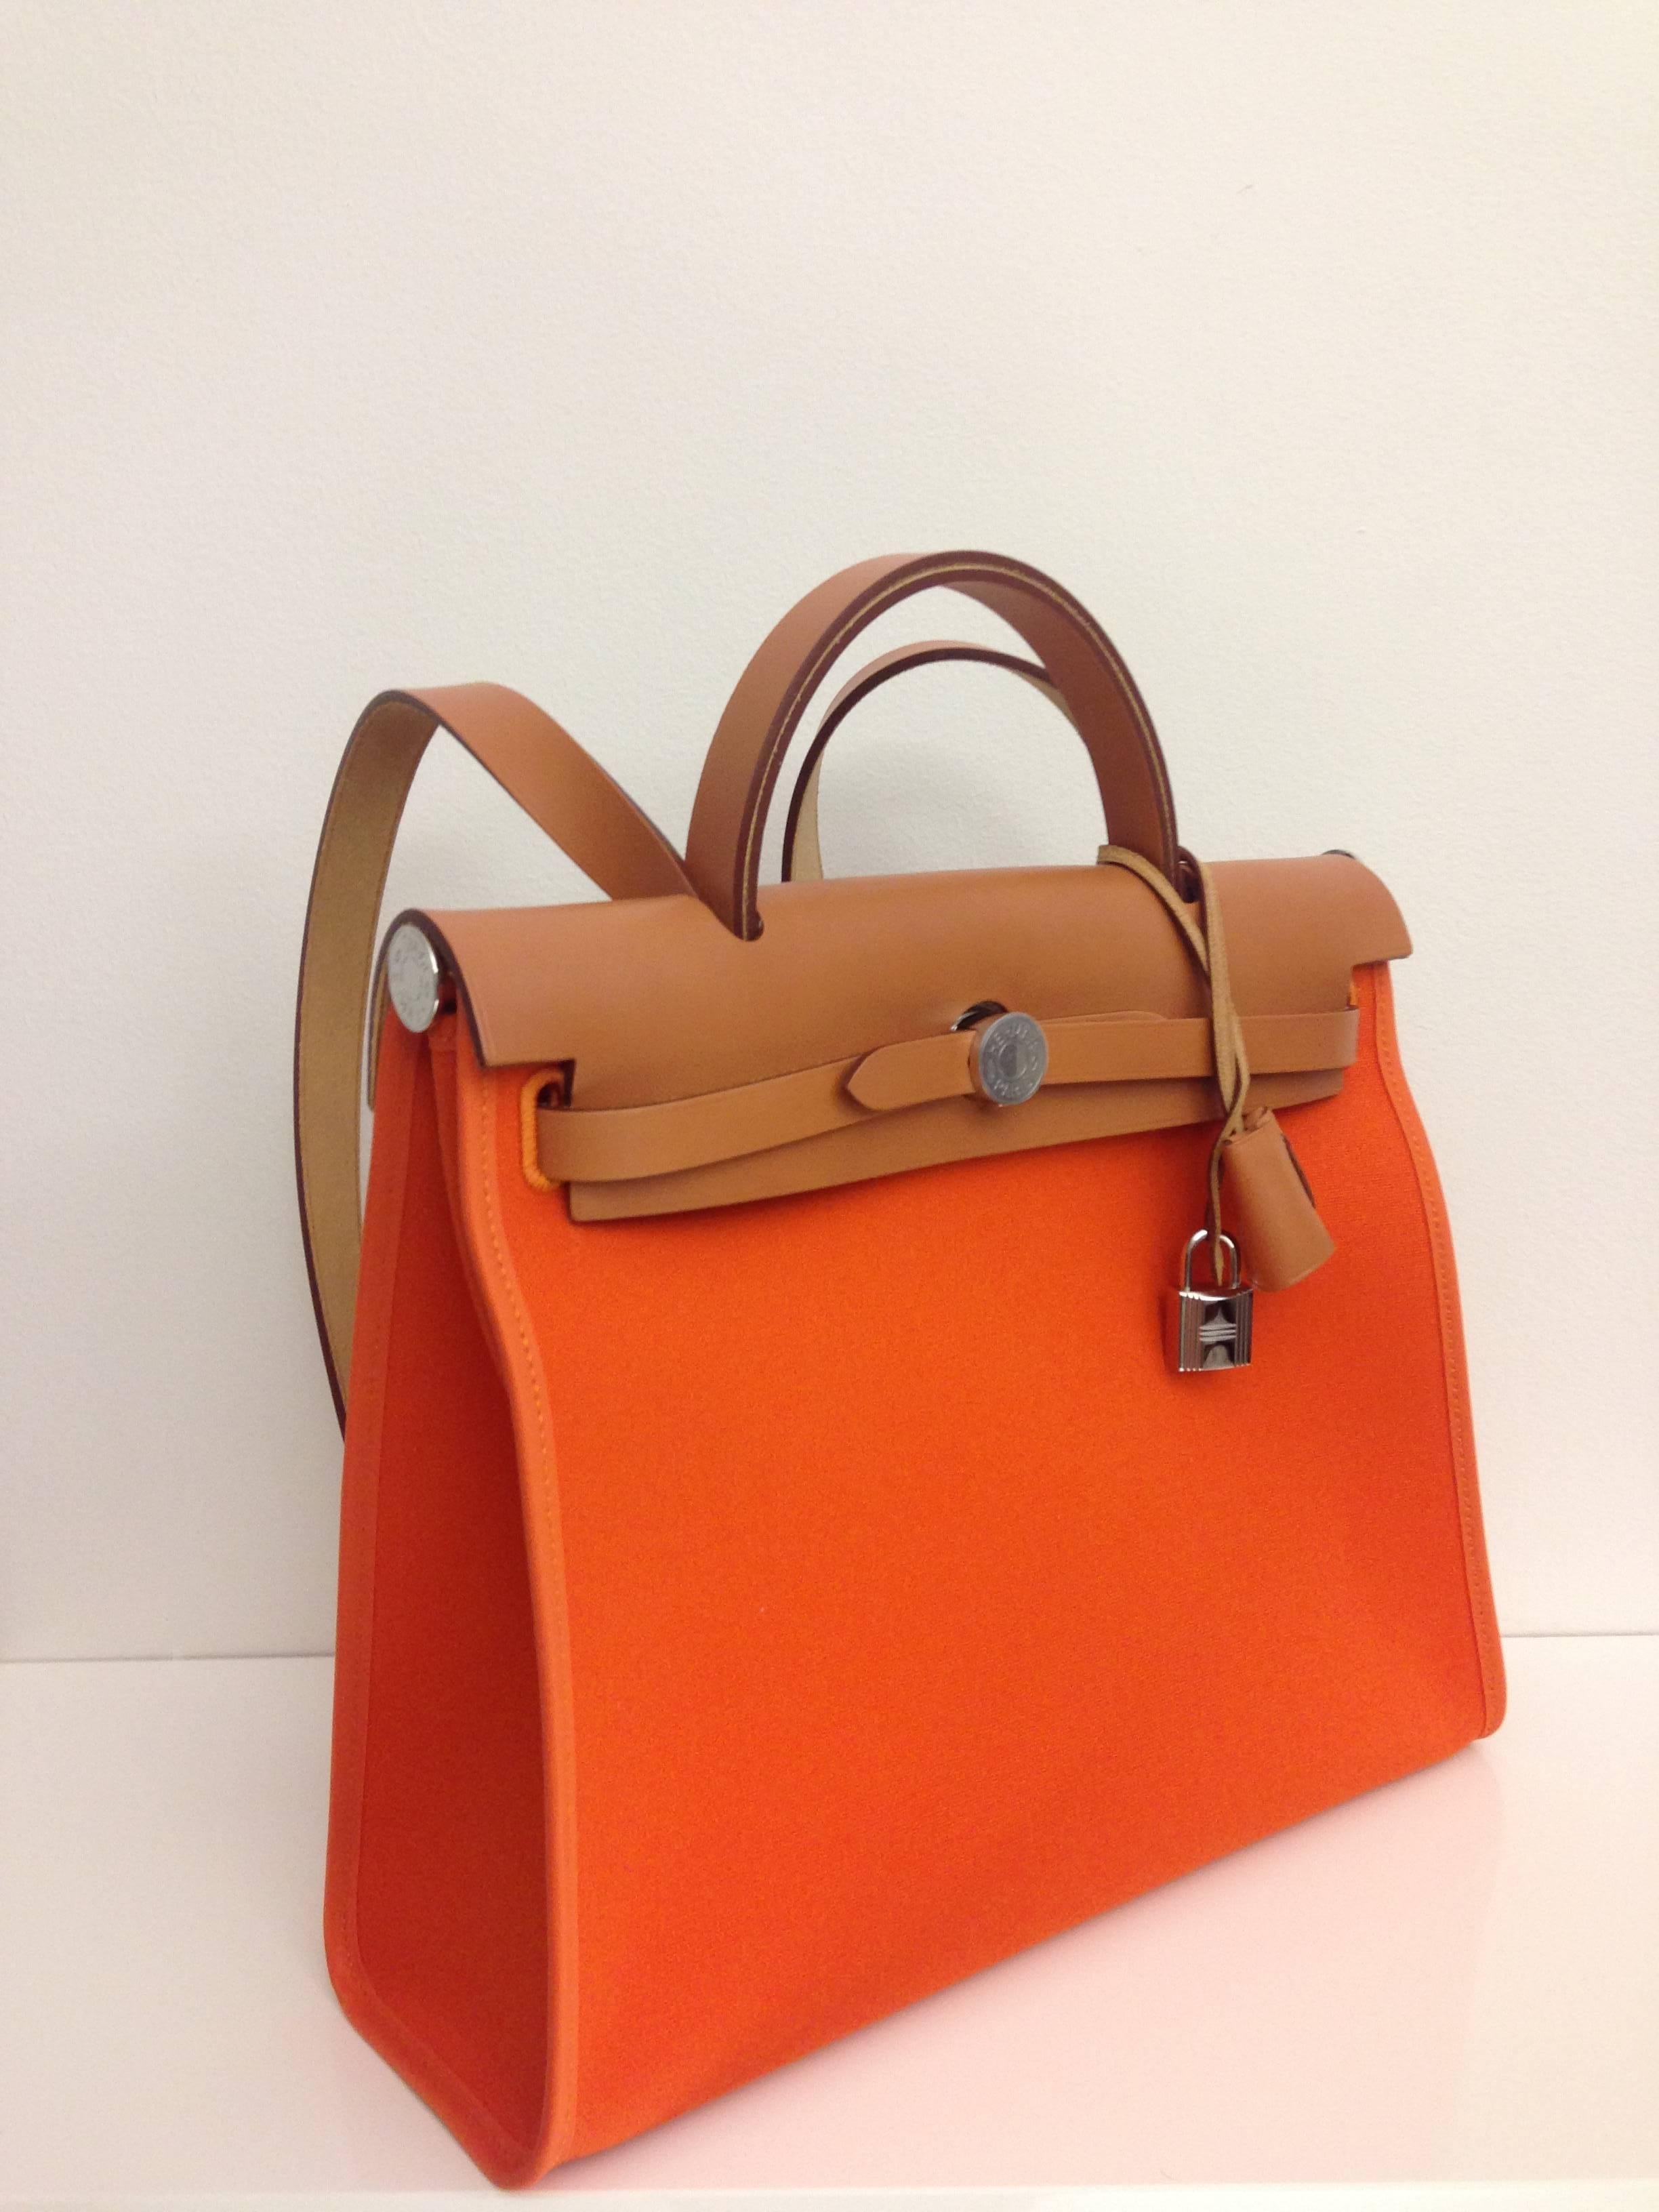 Hermes Herbag

HERMES ZIP HERBAG Orange CROSSBODY CANVAS & LEATHER

This bag comes with a Key and Lock